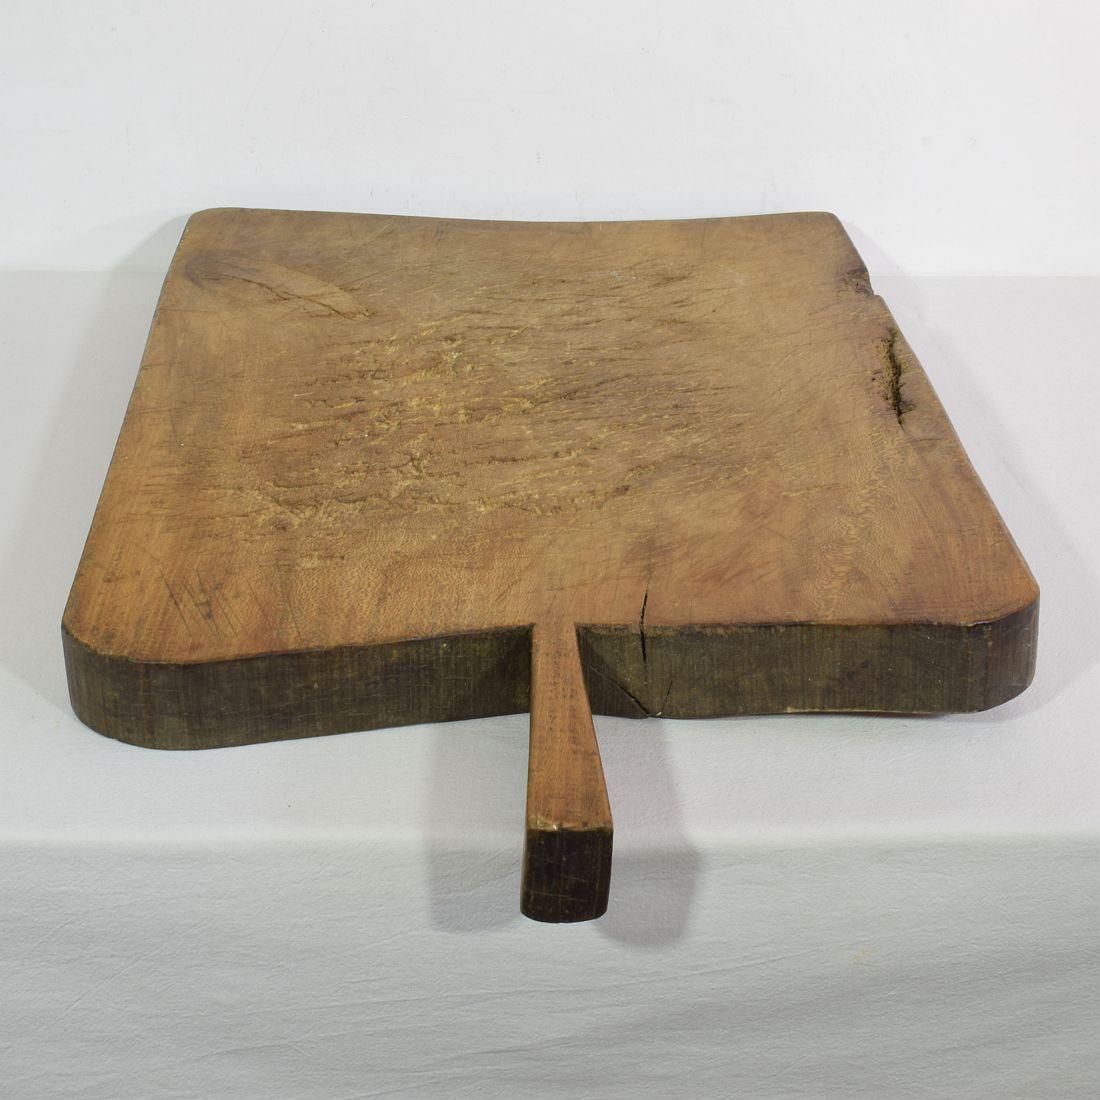 Giant 19th Century, French Wooden Chopping or Cutting Board 1